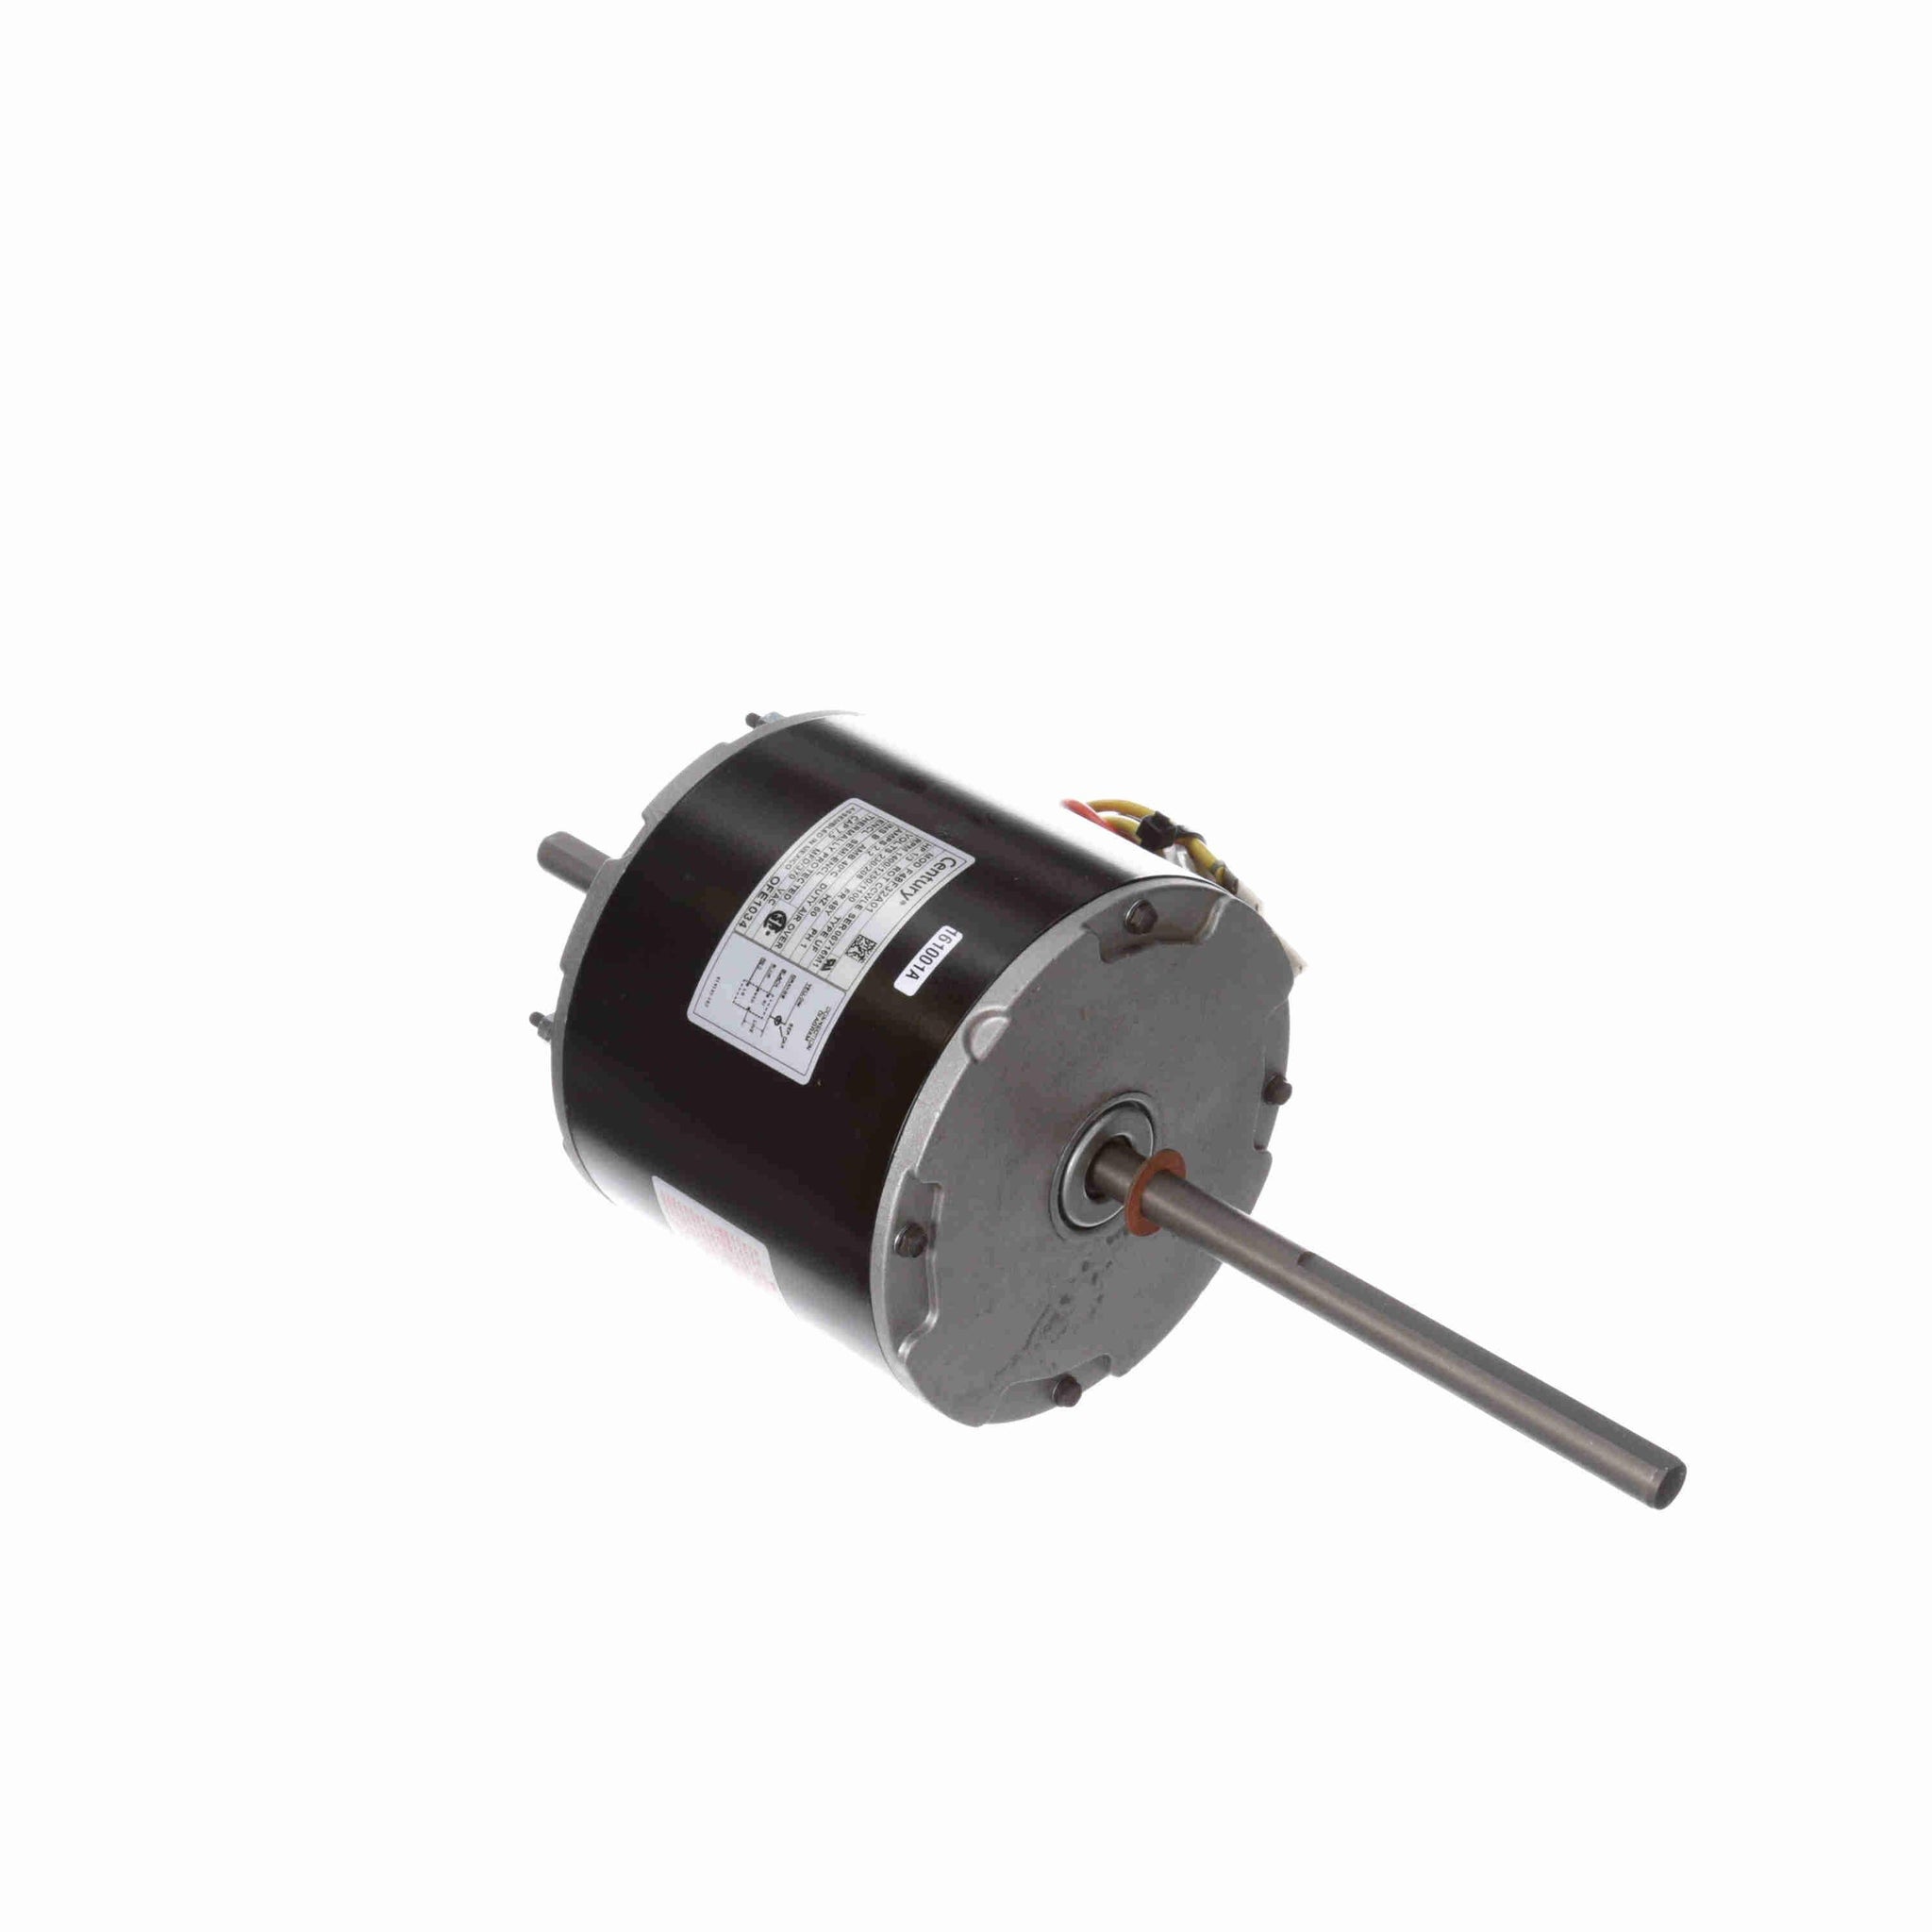 OFE1034 - 1/3 HP OEM Replacement Motor, 1400/1250/1100 RPM, 3 Speed, 230/208 Volts, 48 Frame, Semi Enclosed - Hardware & Moreee